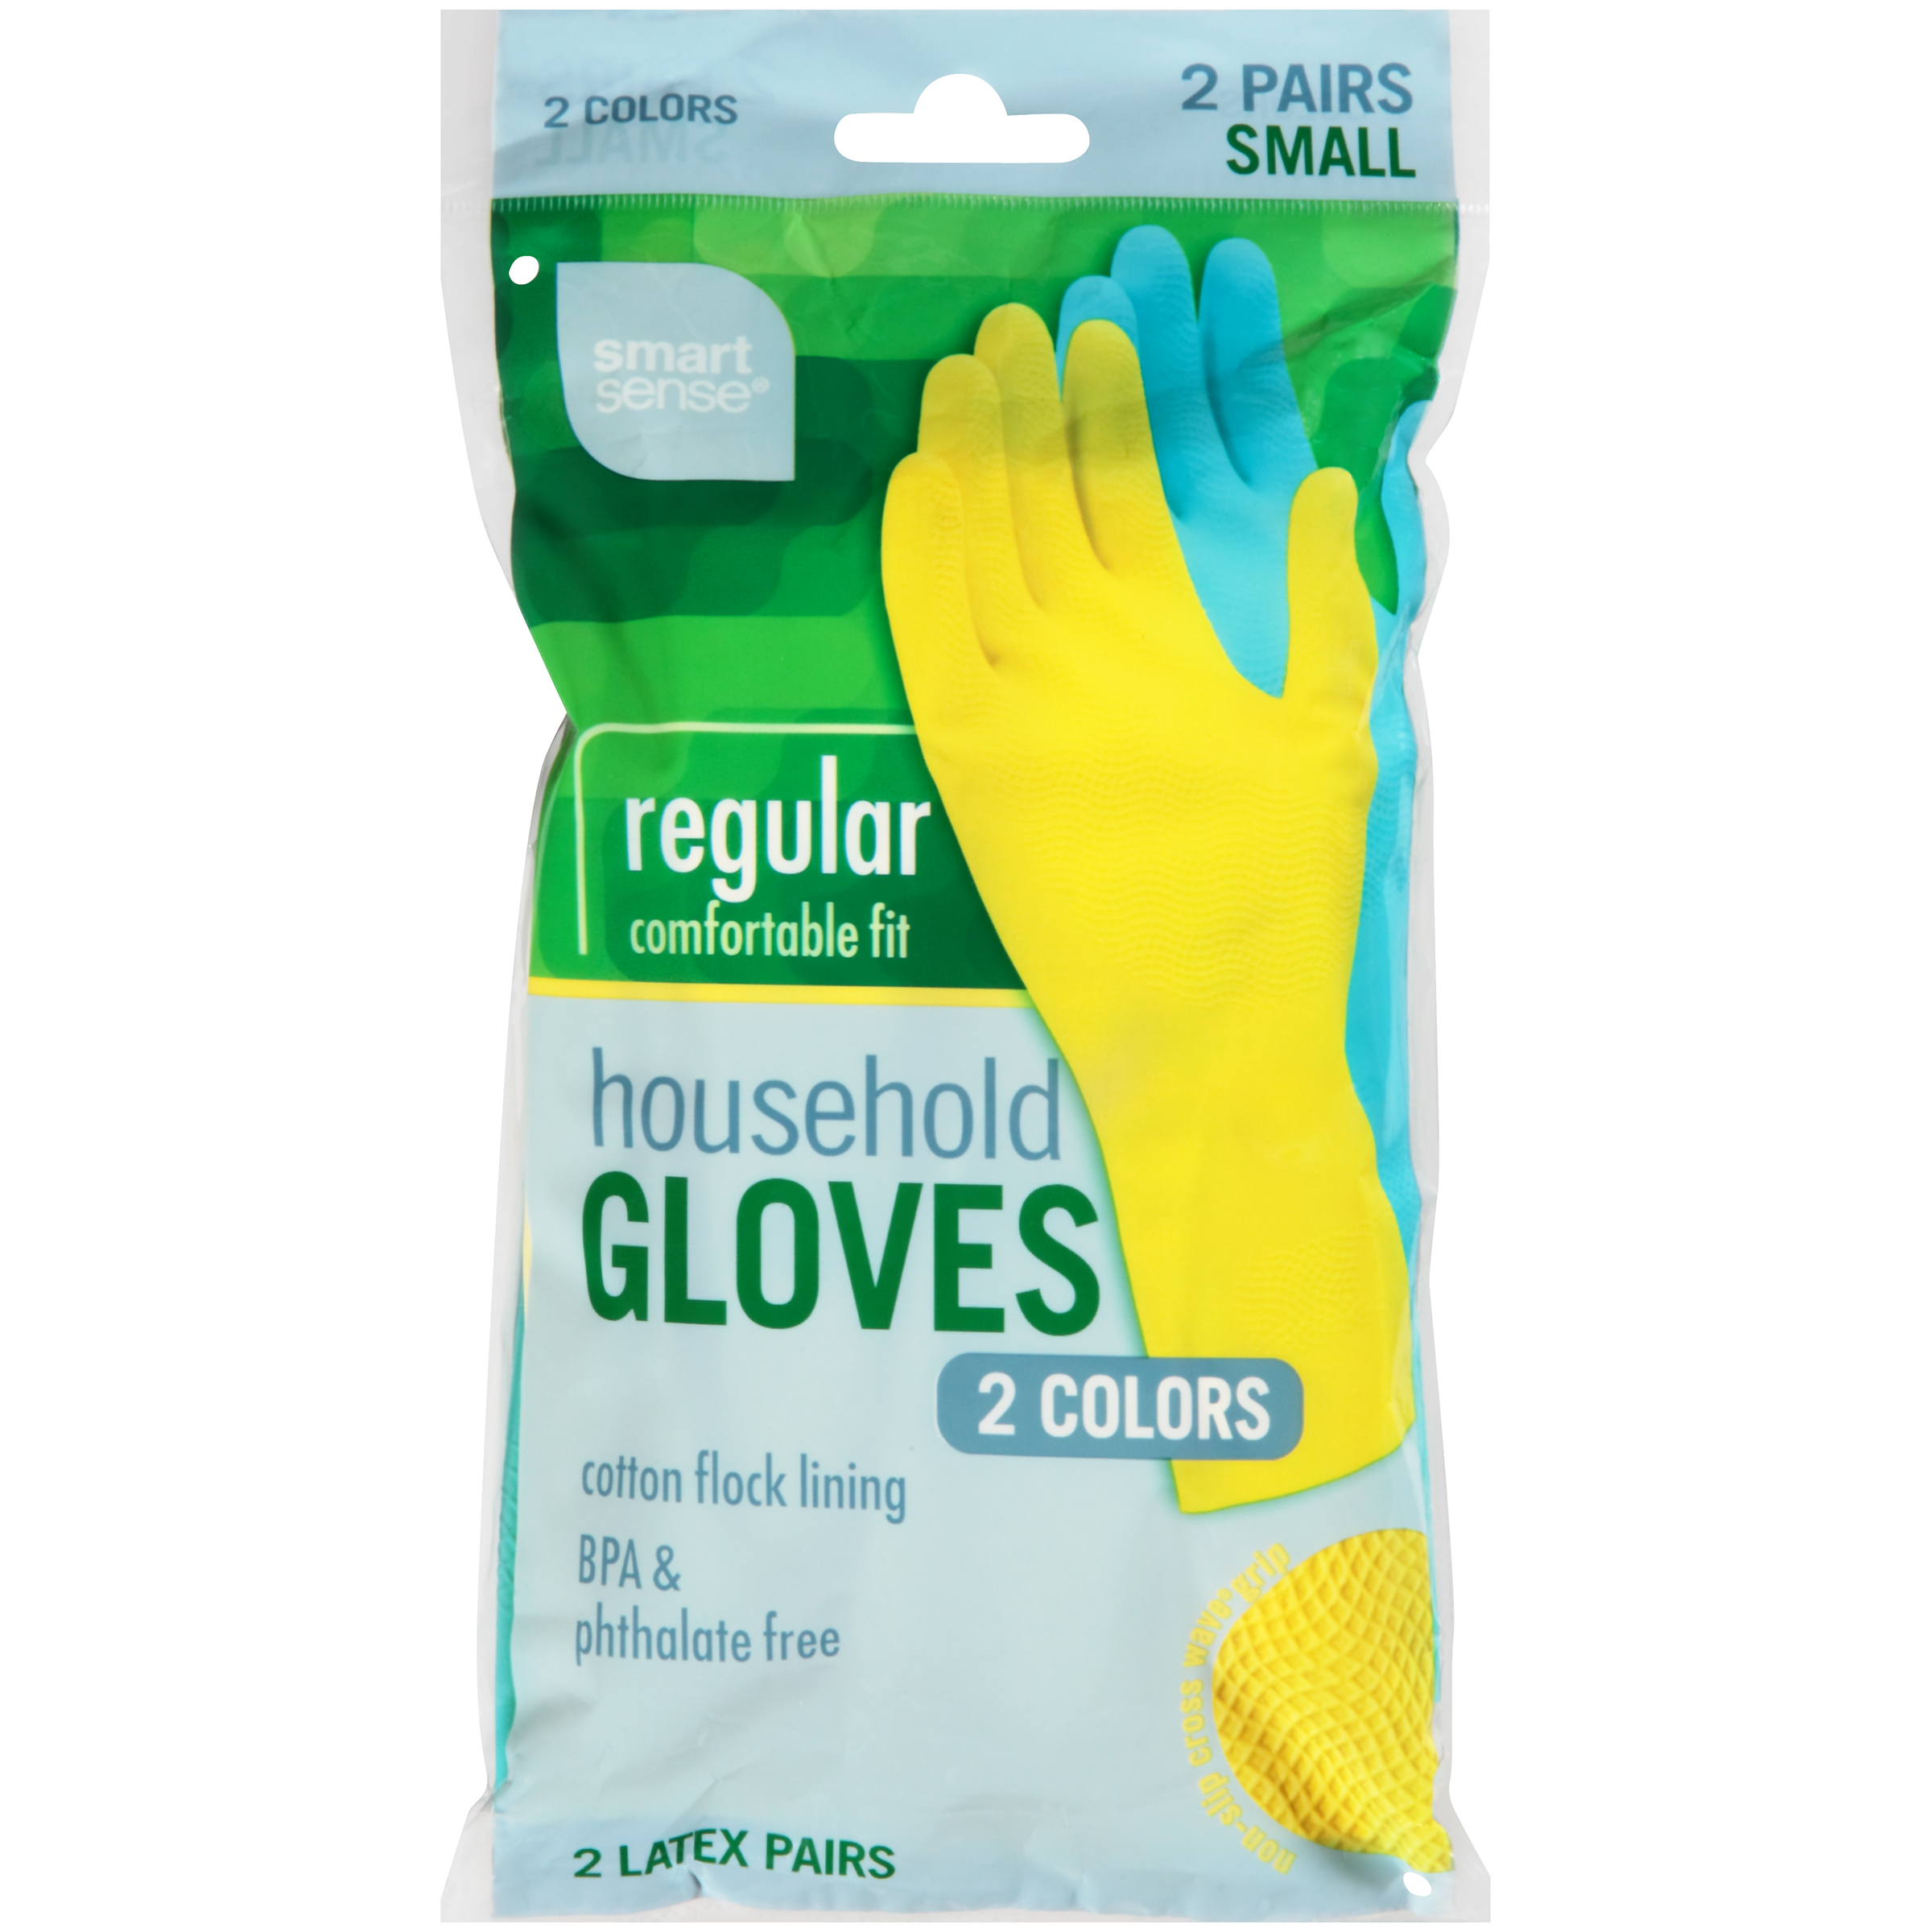 Smart Sense Latex Gloves Household Small, Two Pairs